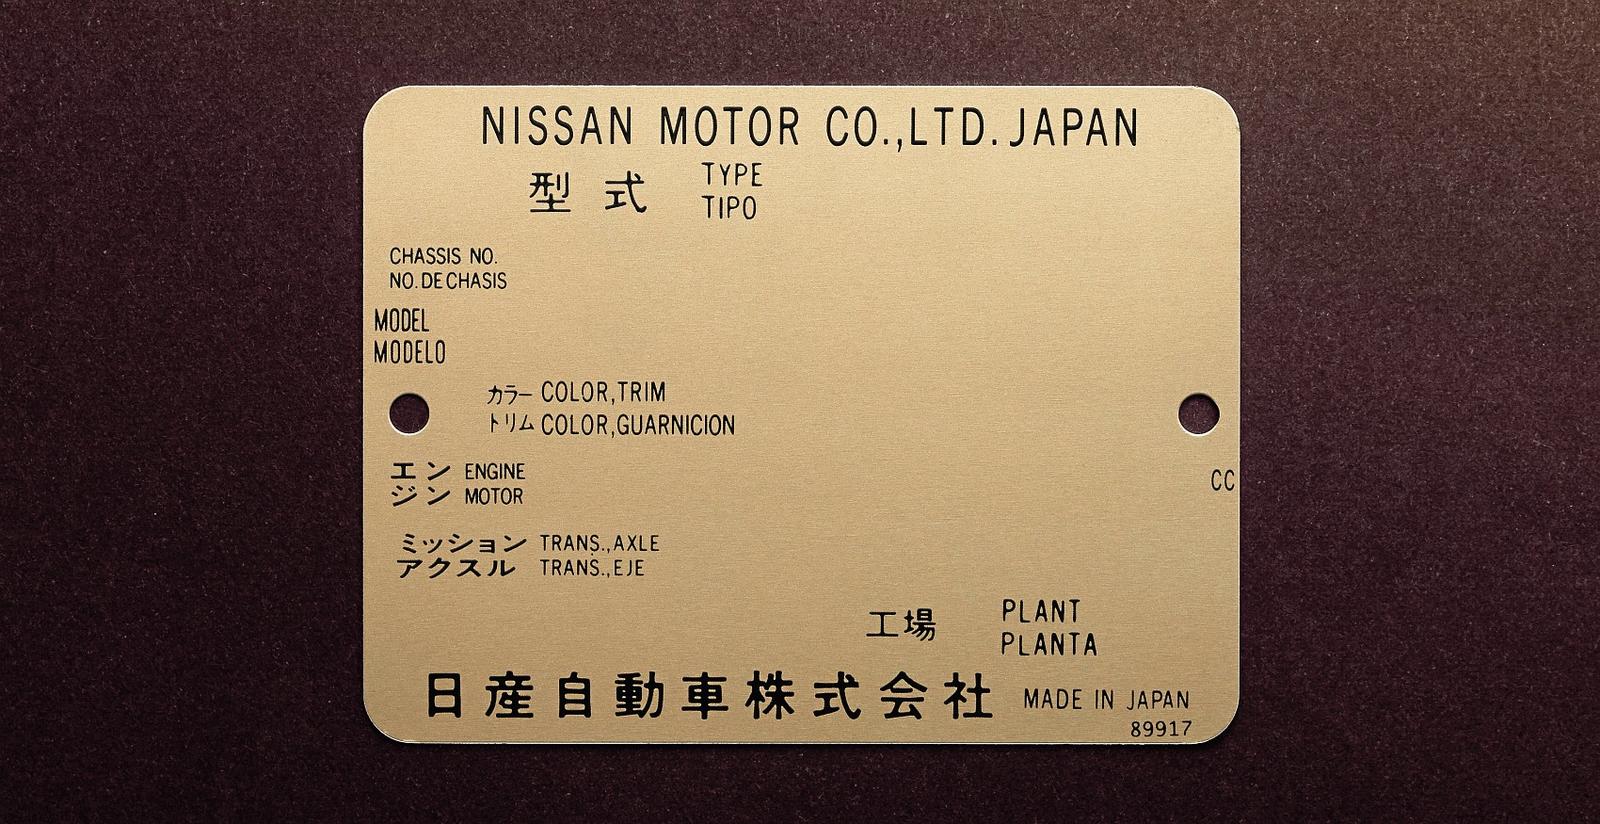 Nissan to make special GT-R celebrating partnership with Naomi O